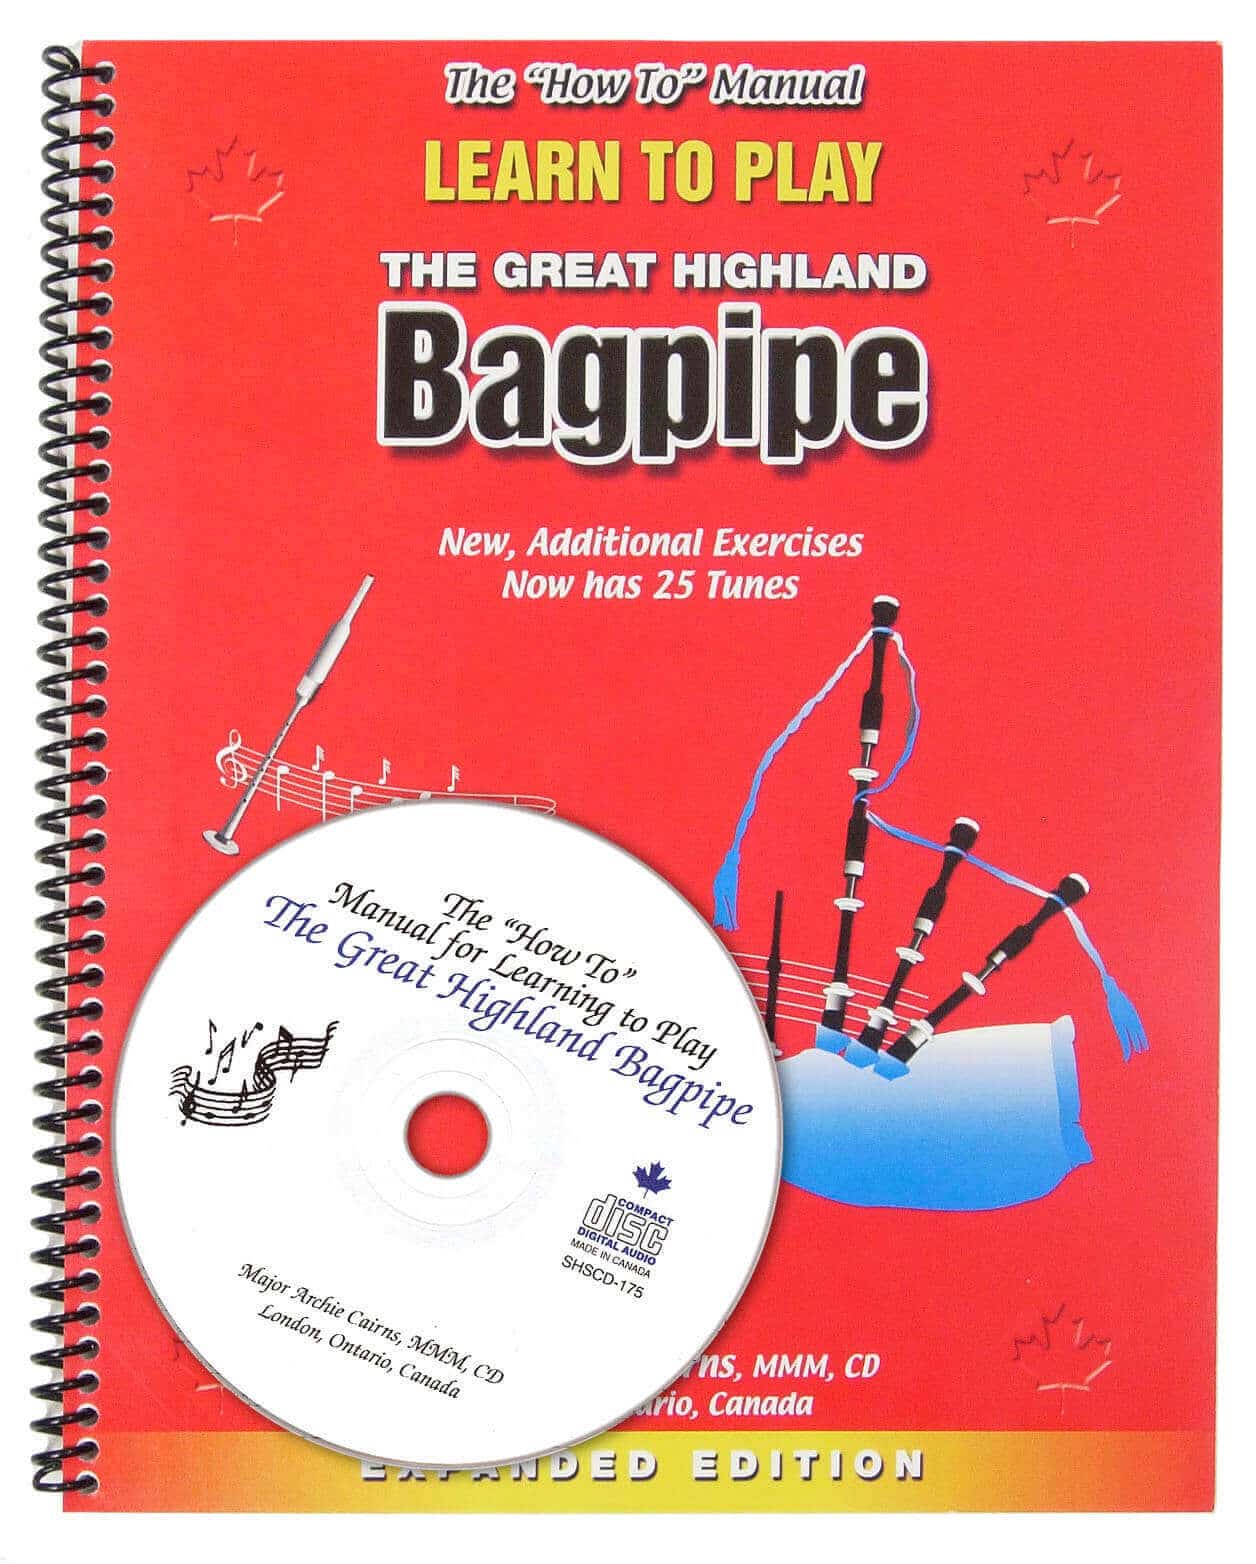 Learn to Play Bagpipes Manual and CD